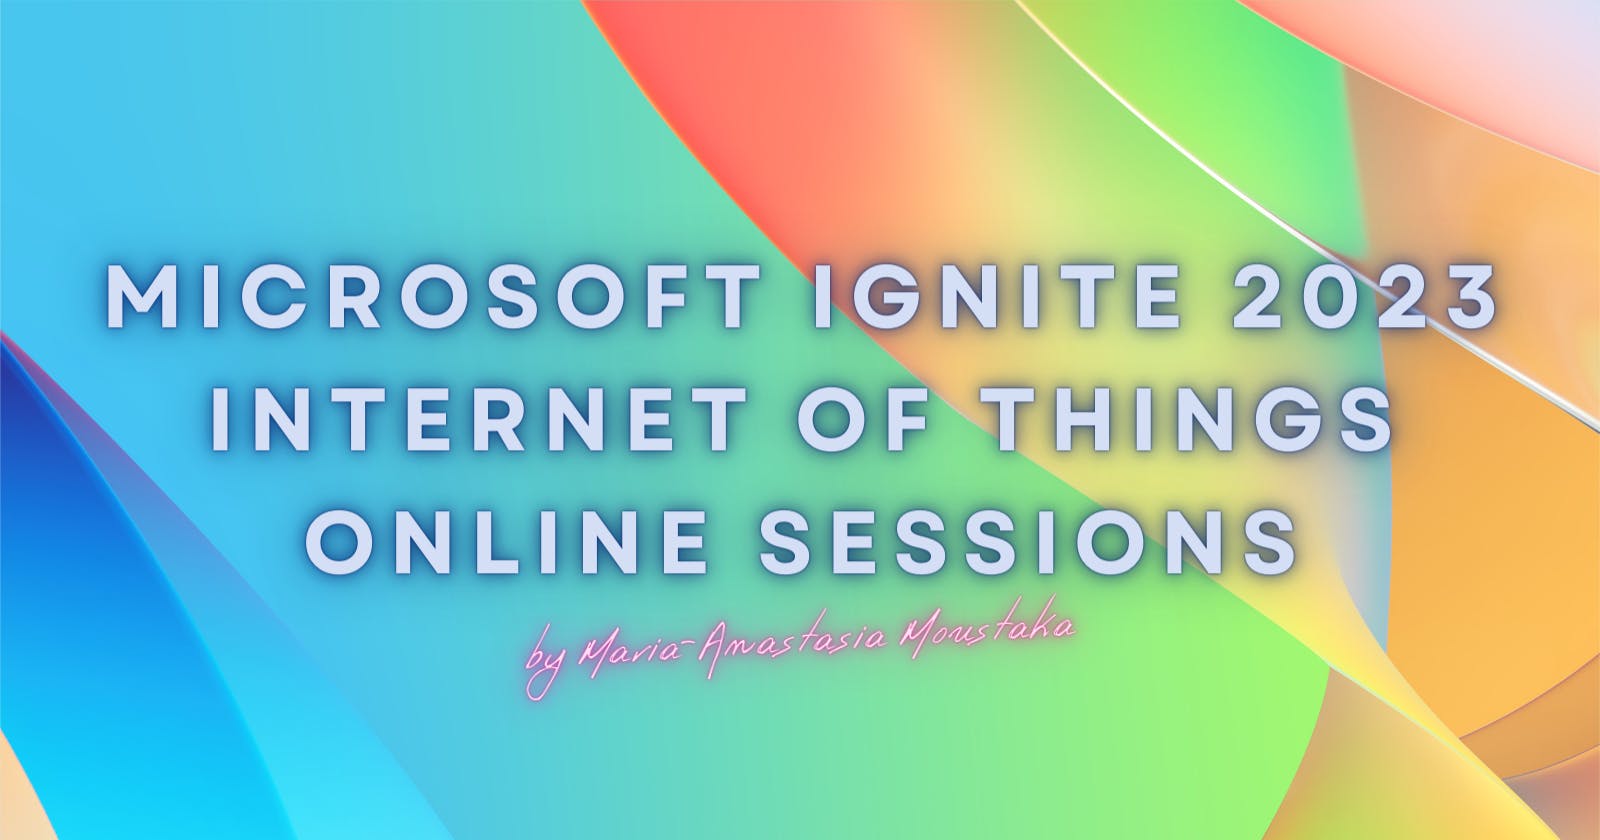 Microsoft Ignite 2023 Internet of Things Online Sessions